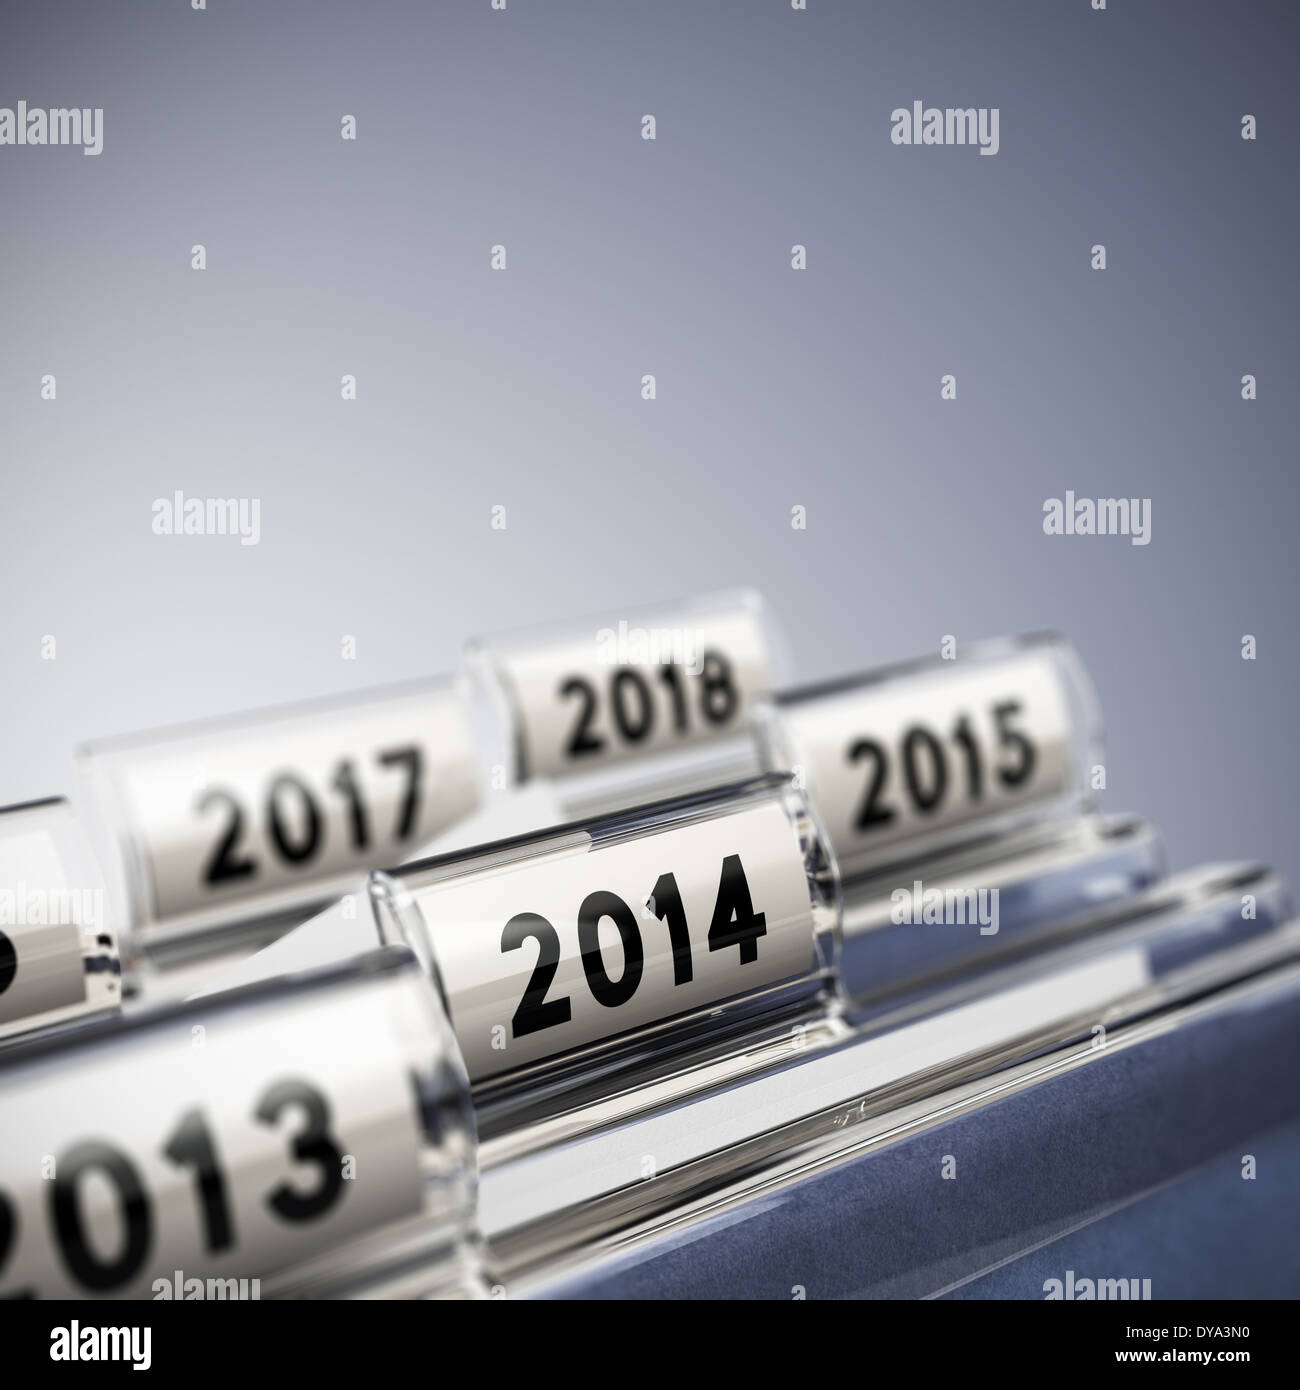 Folder tab with focus on 2014, blue background. Taxes concept for illustration of mid-term or long-term business strategy. Stock Photo